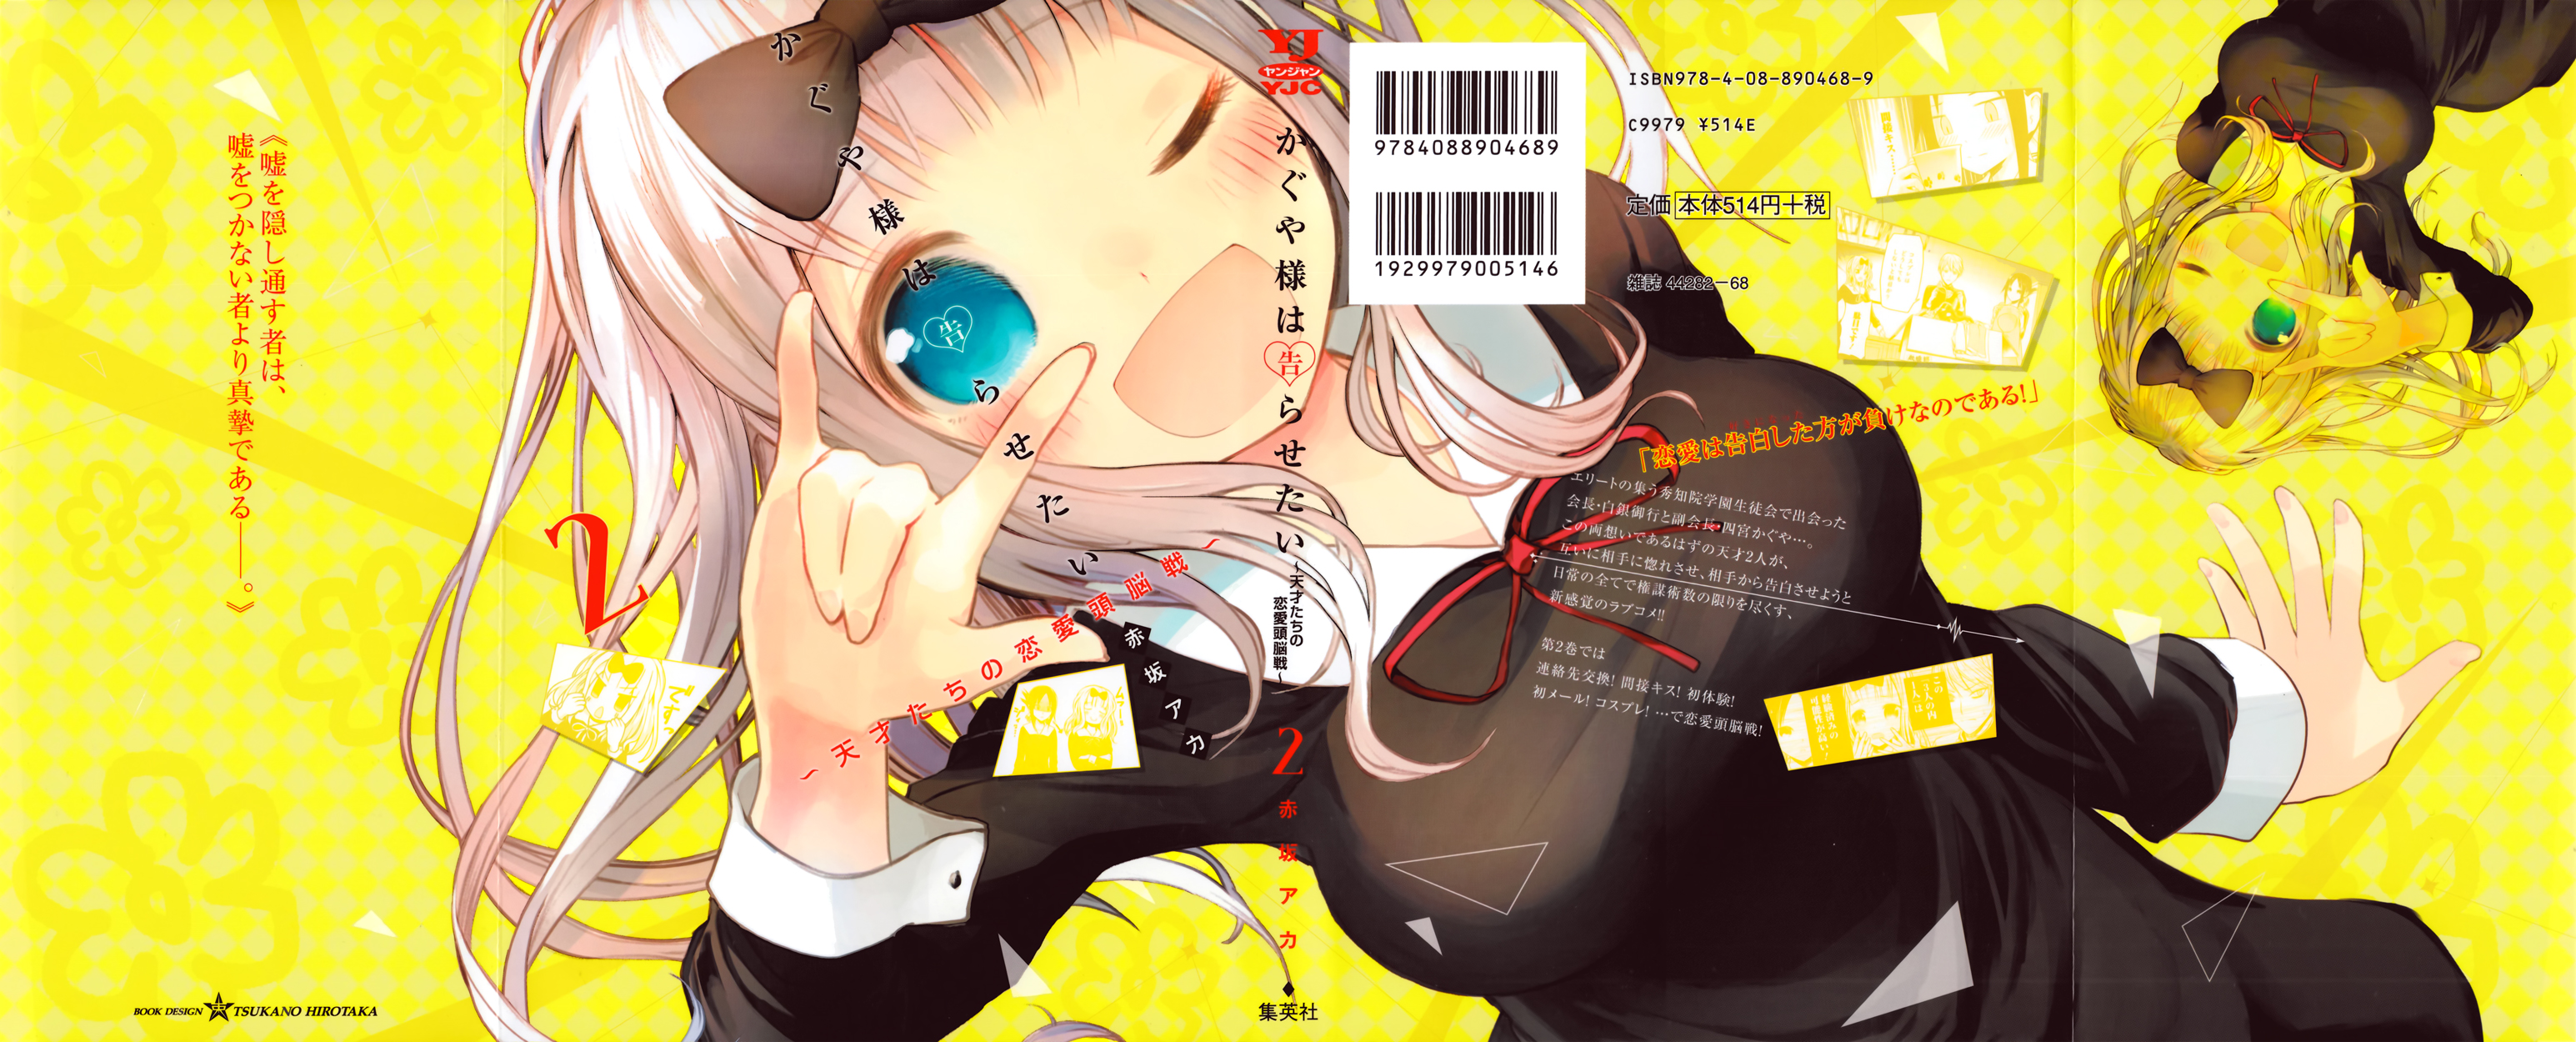 Kaguya Wants to be Confessed To: The Geniuses' War of Love and Brains Vol.2 Ch.20.5